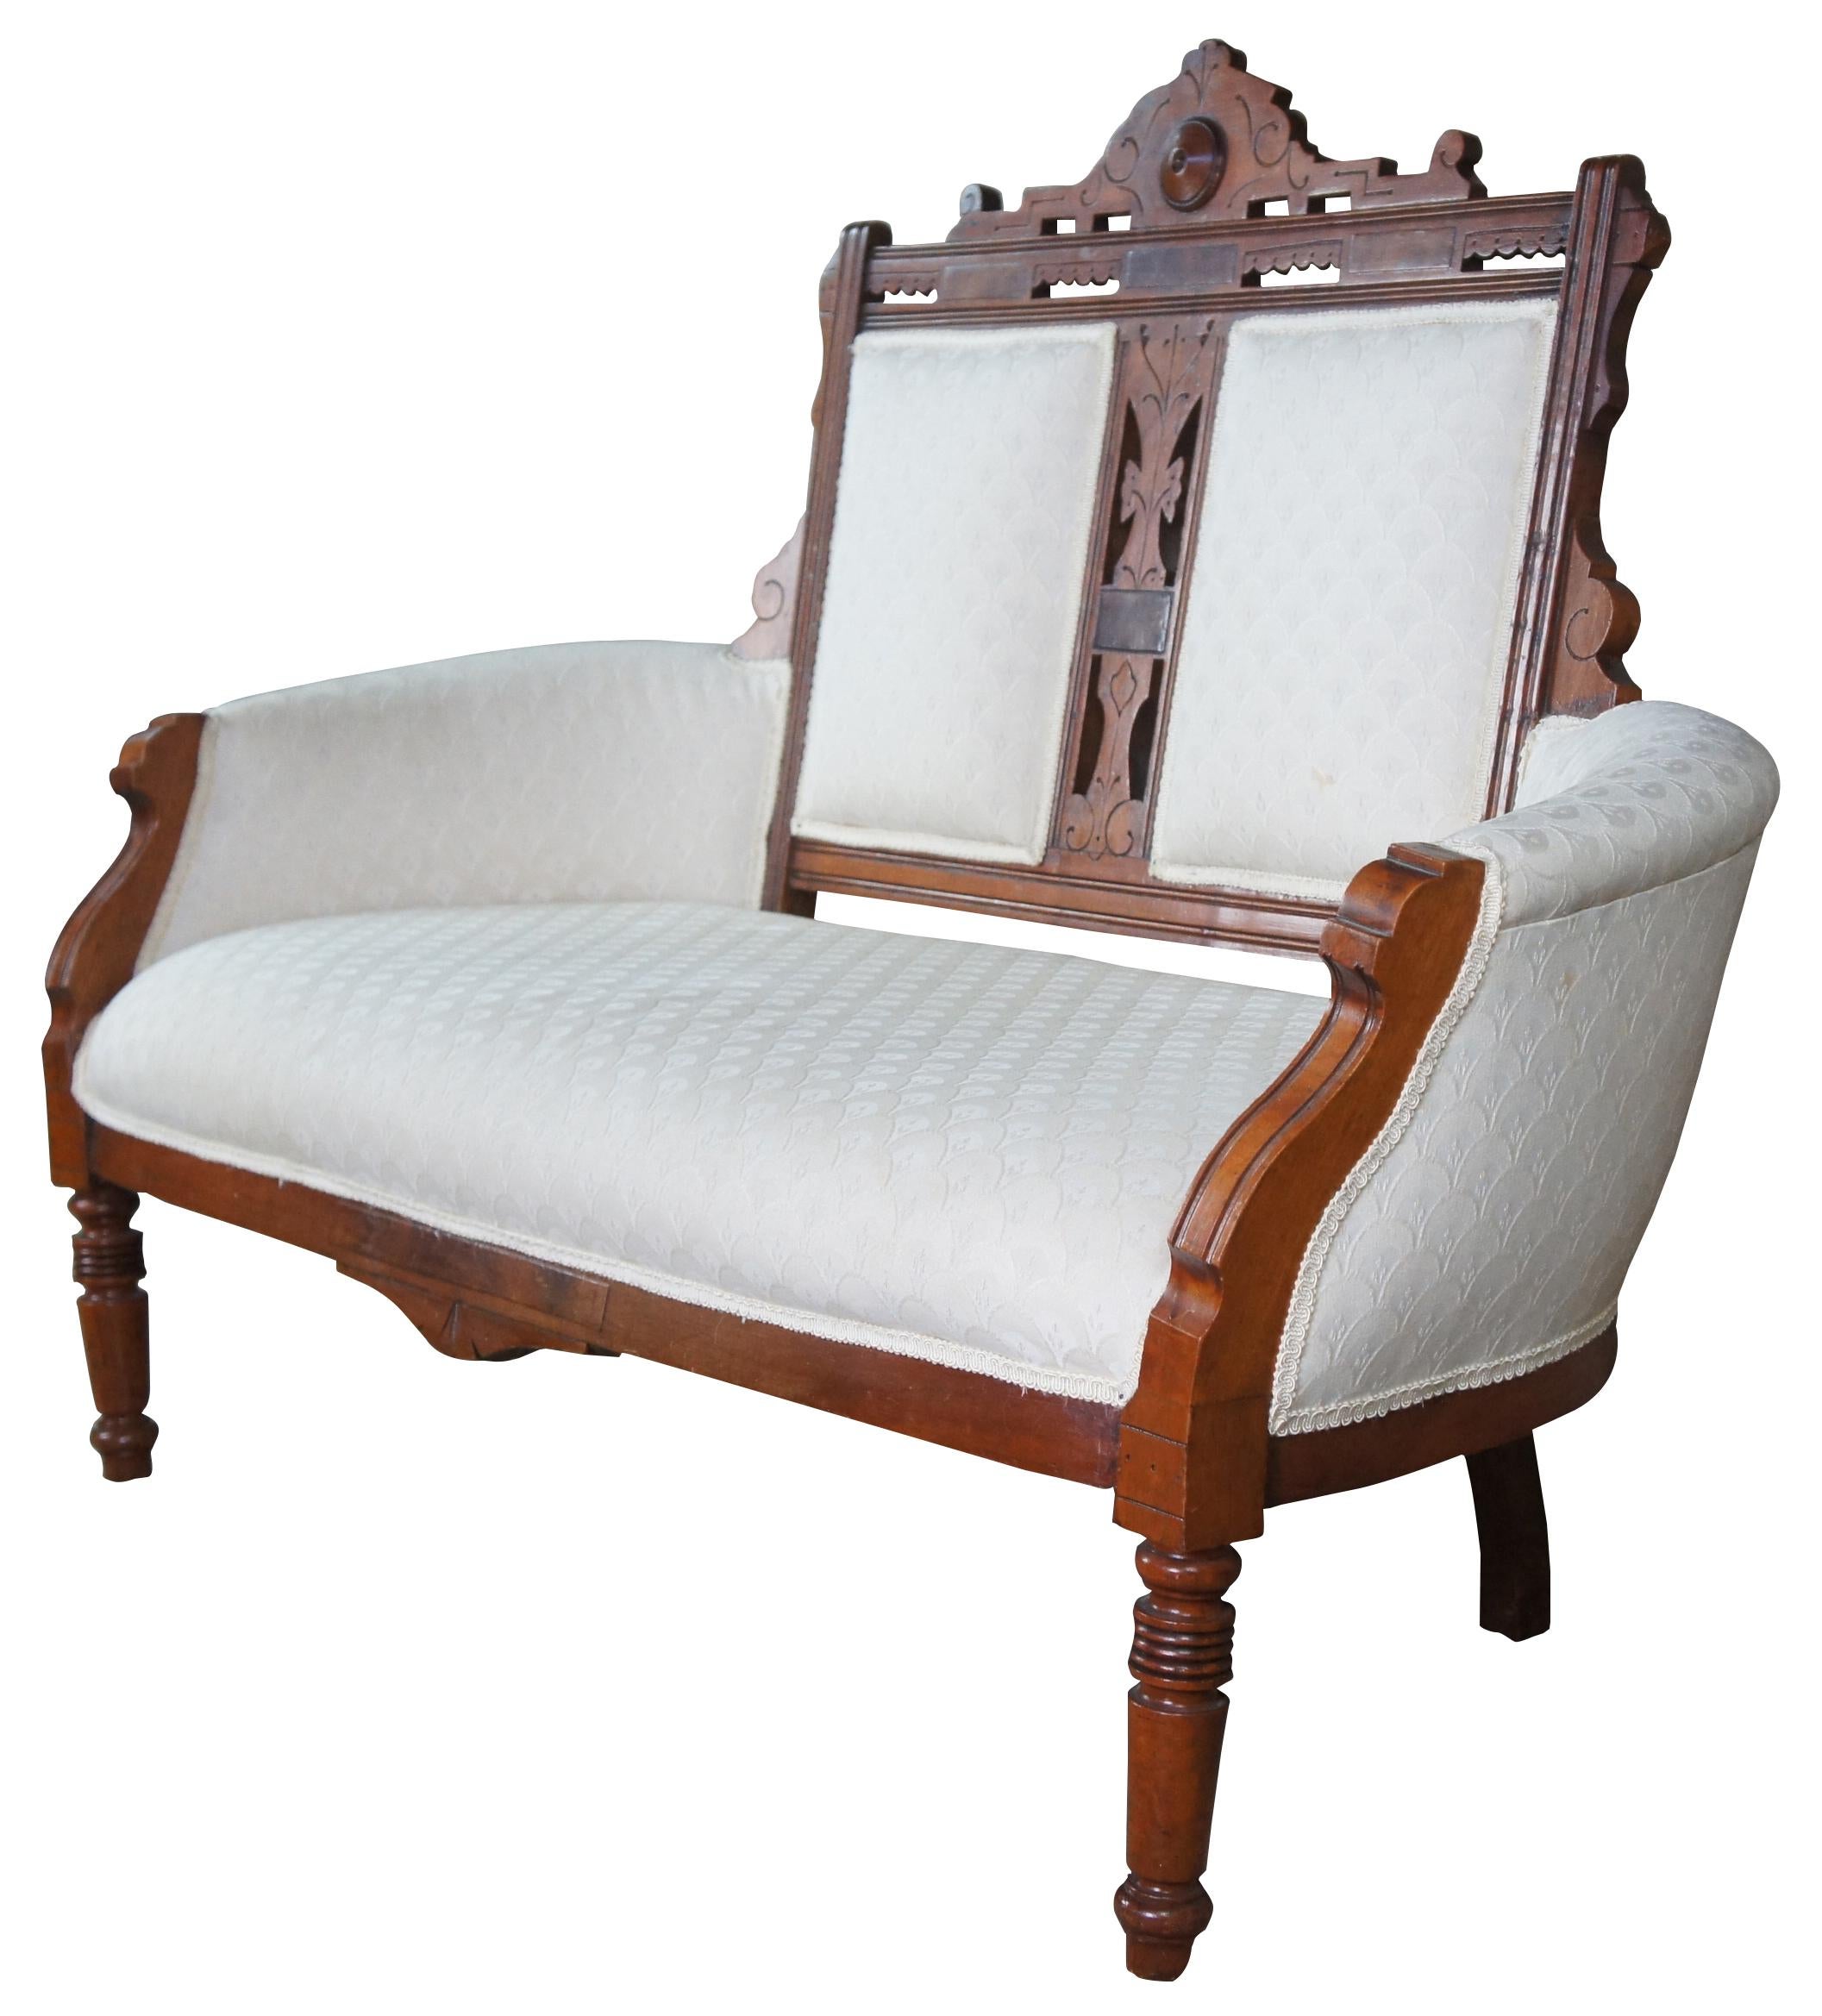 Antique Victorian Eastlake parlor settee or love seat. Made of walnut featuring a flare of Renaissance Revival with carved pierced back and frame with turned legs supporting a wide frame and white upholstery. Measure: 55